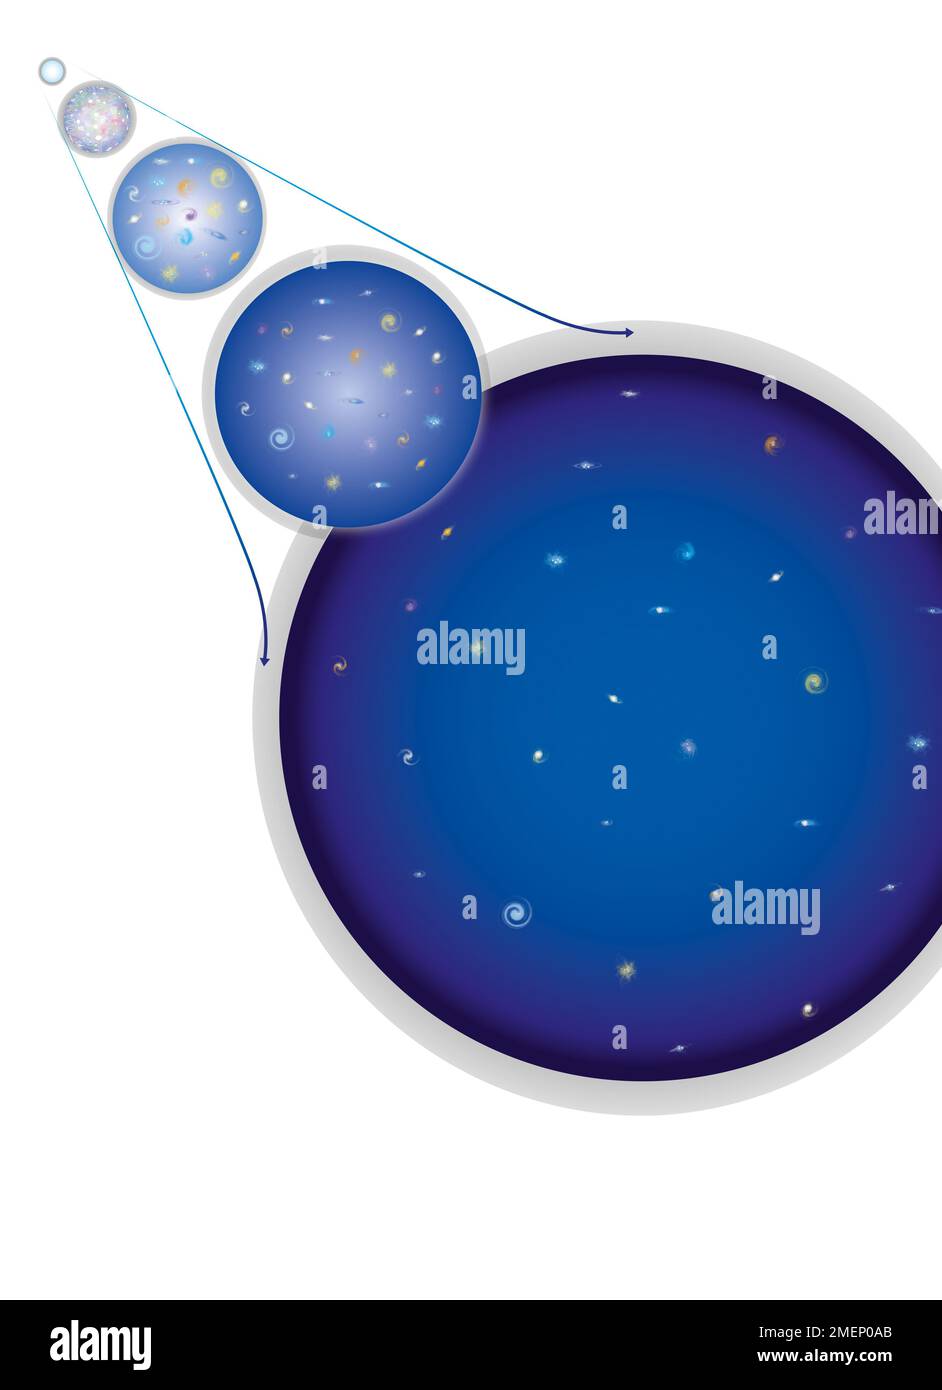 Illustration of the Big Bang in five stages. Stock Photo